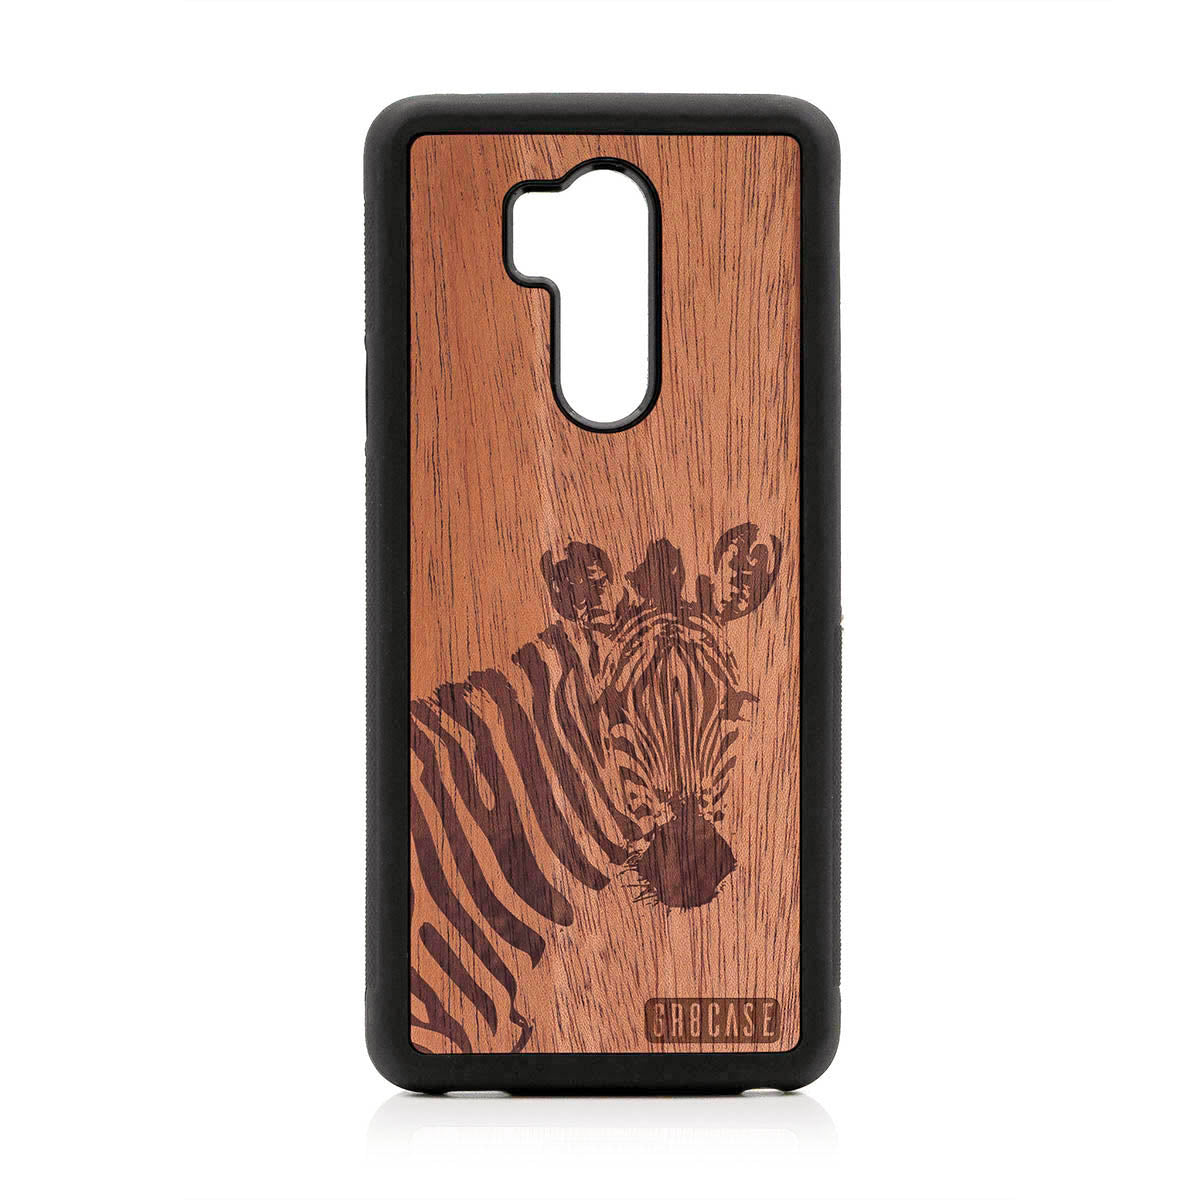 Lookout Zebra Design Wood Case For LG G7 ThinQ